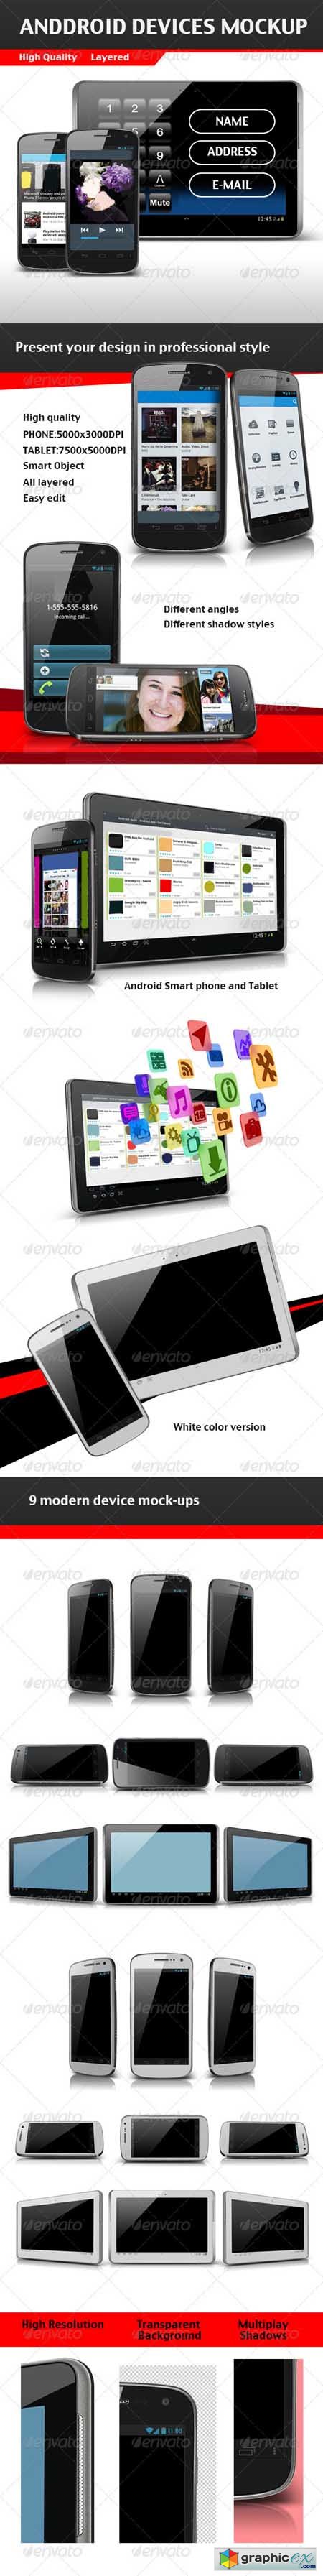 Android Devices Mockups 3372141